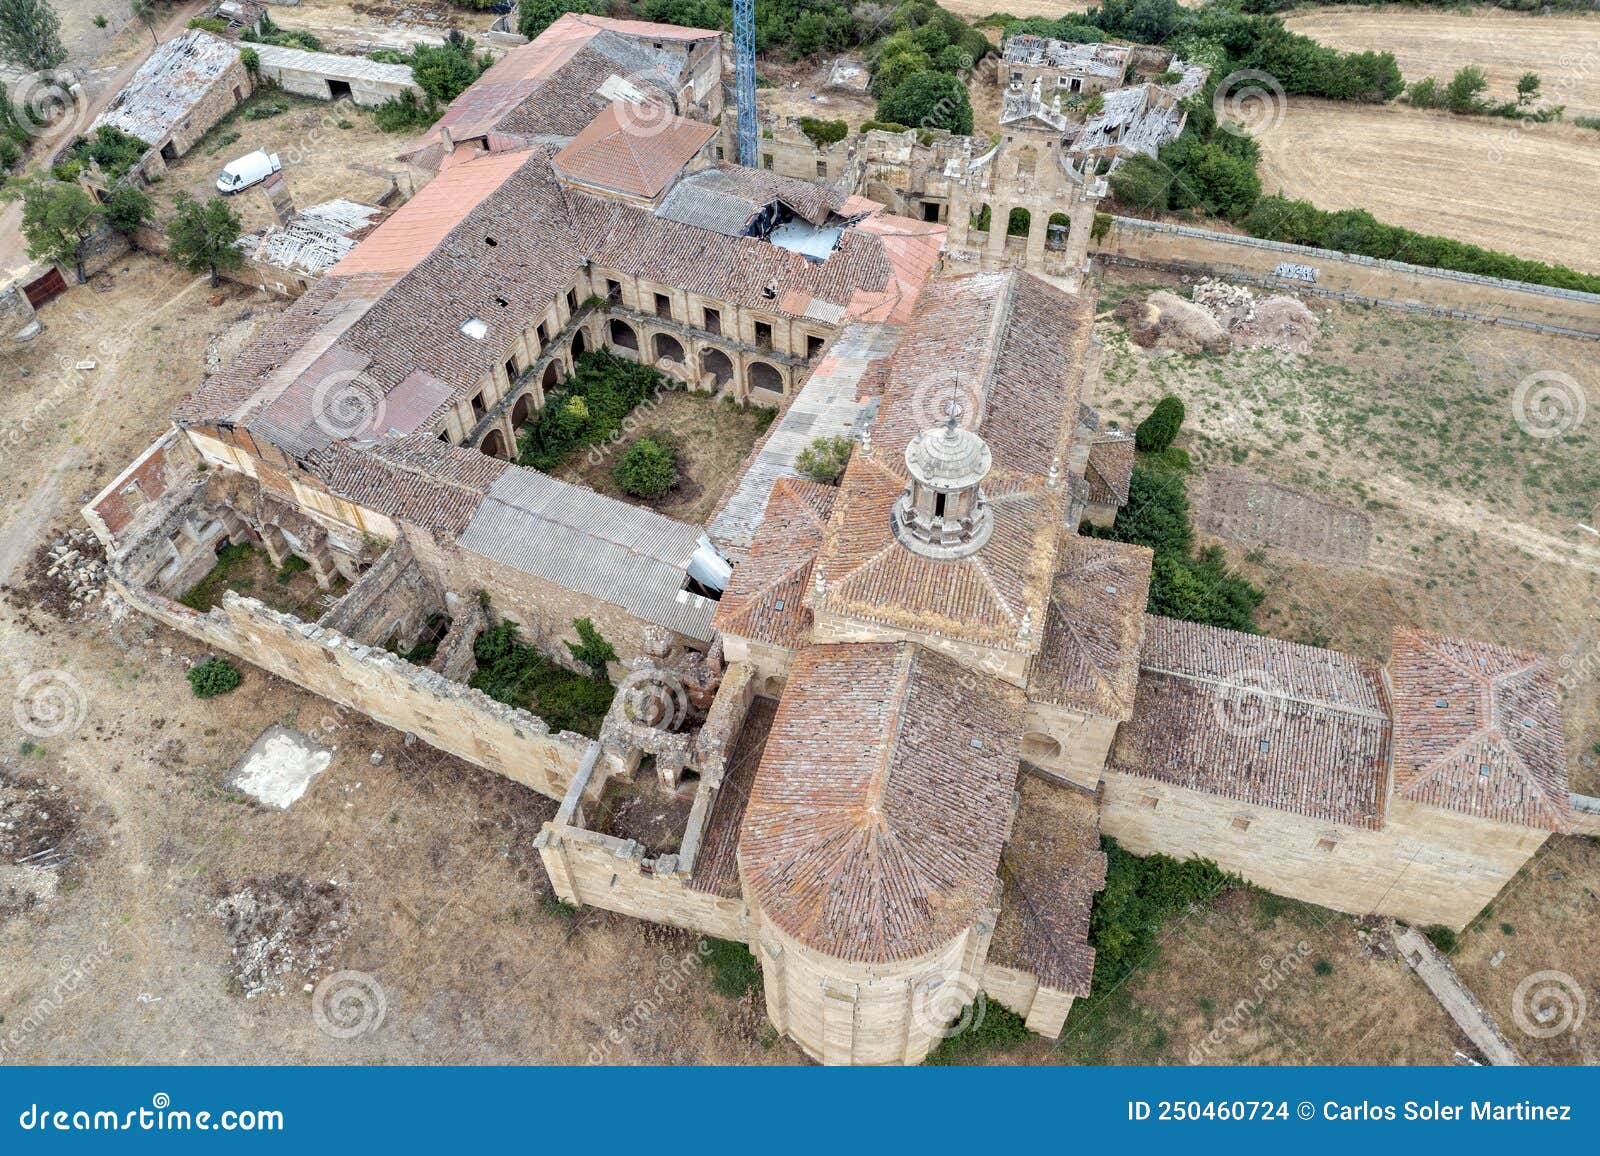 monastery of charity is a building in the spanish municipality of ciudad rodrigo, in the province of salamanca